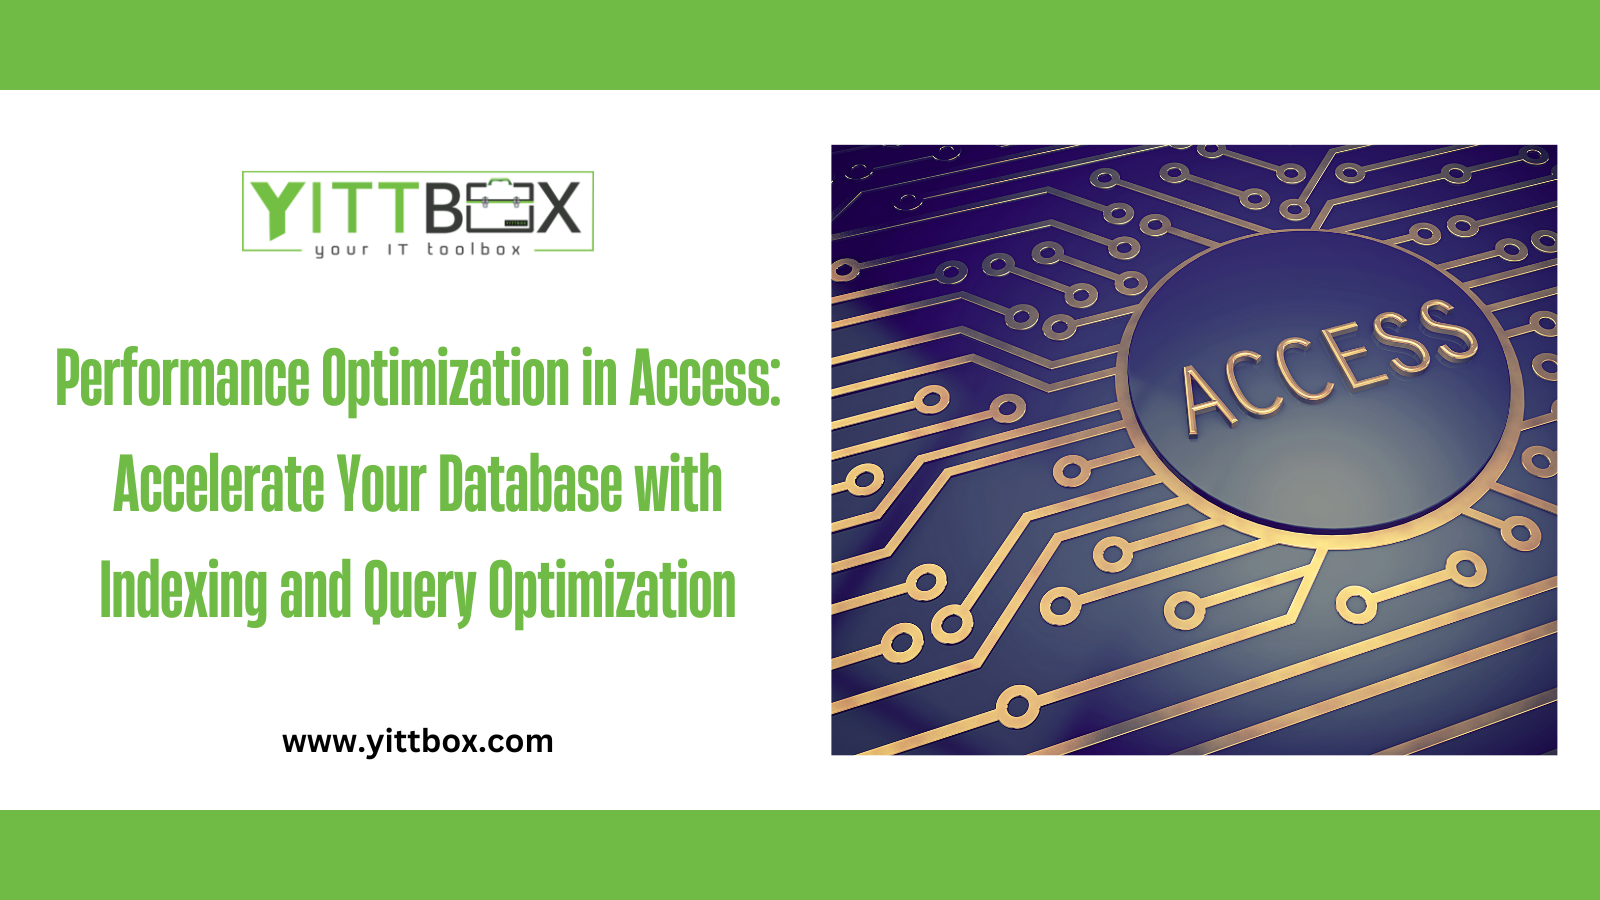 Performance Optimization in Access: Accelerate Your Database with Indexing and Query Optimization